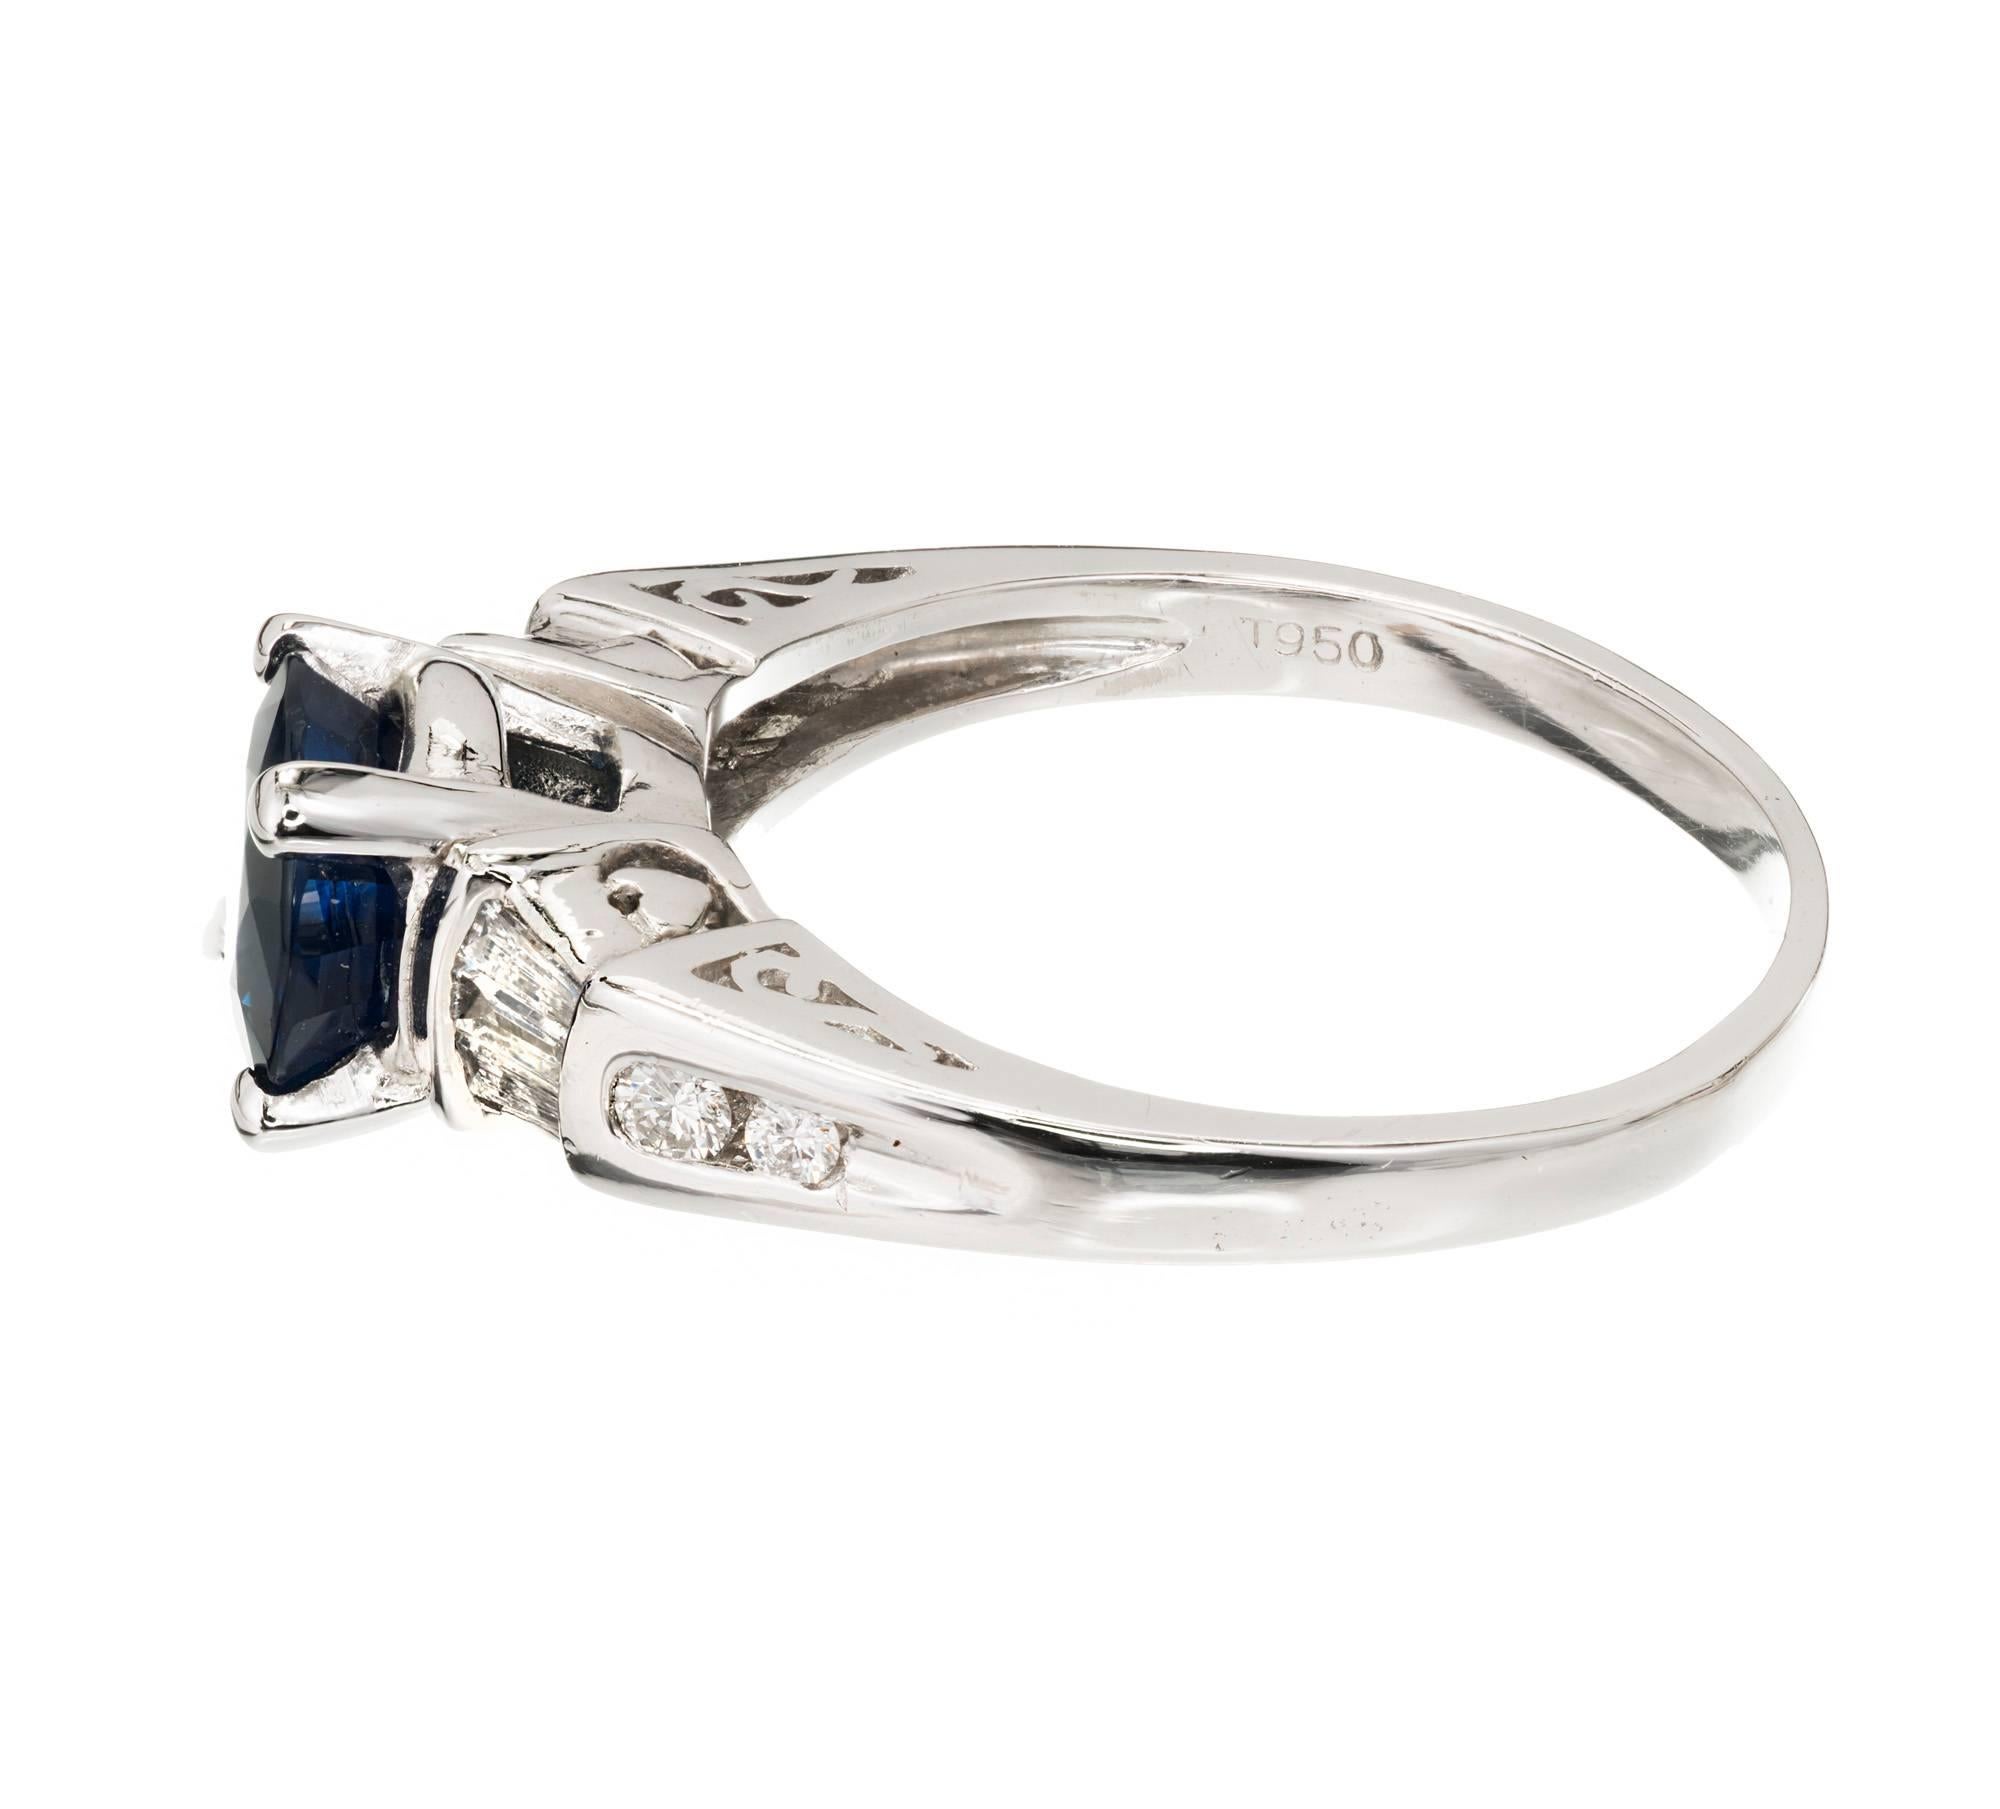 GIA Certified 1.75 Carat Round Sapphire Diamond Platinum Engagement Ring In Good Condition For Sale In Stamford, CT